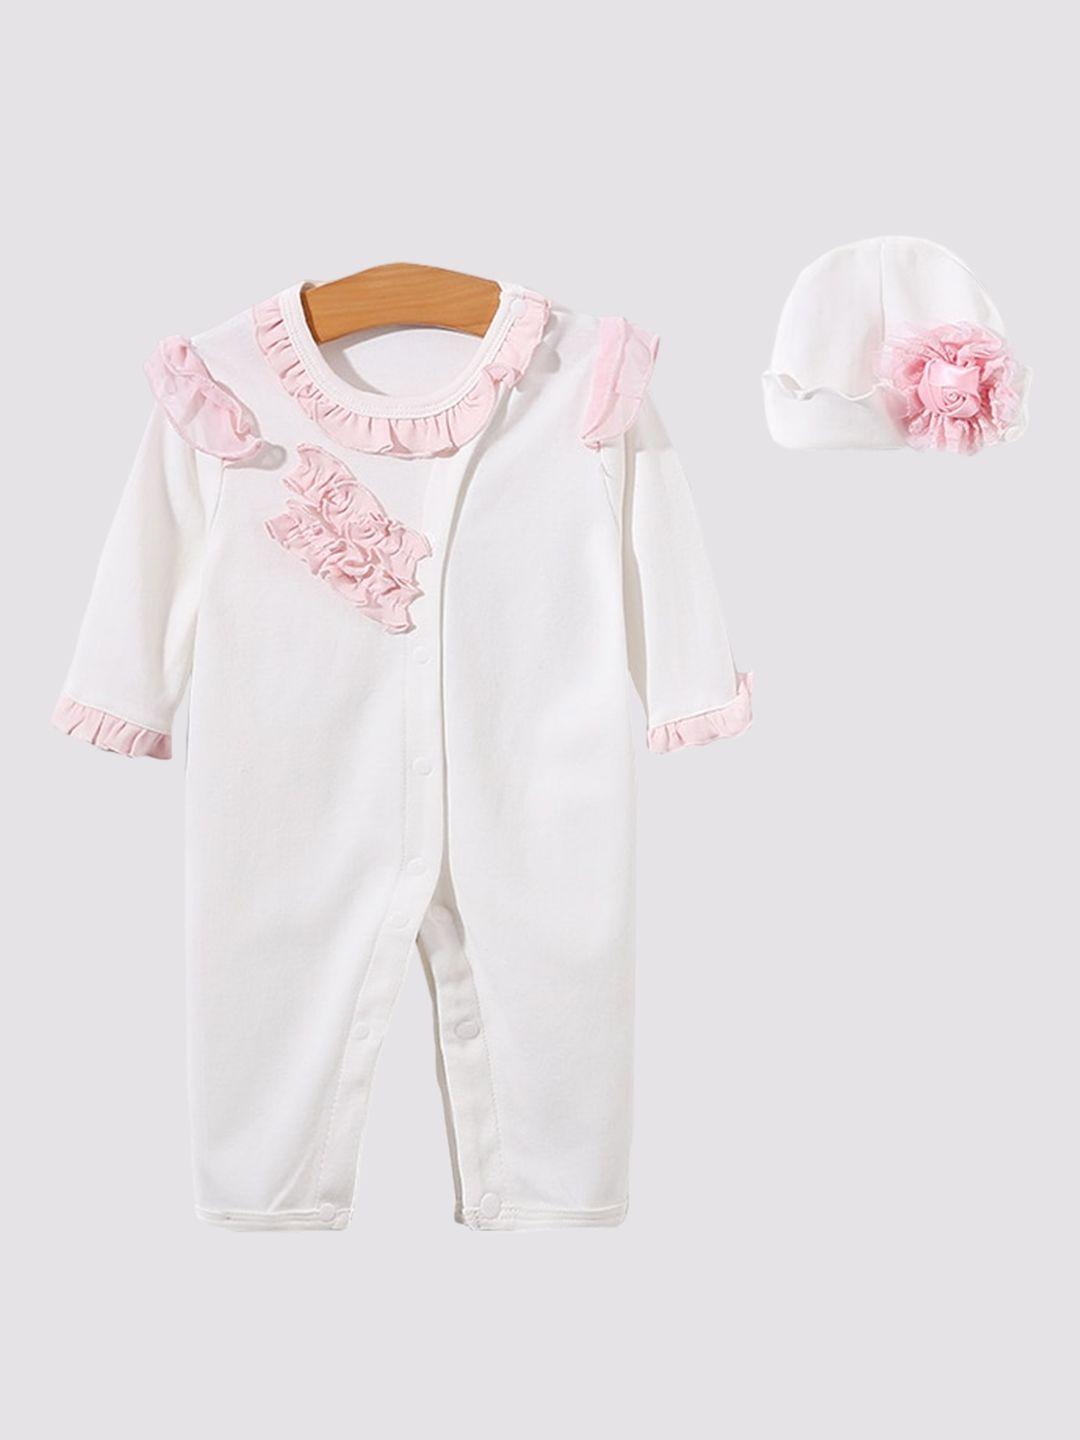 stylecast-infant-girls-white-self-design-cotton-rompers